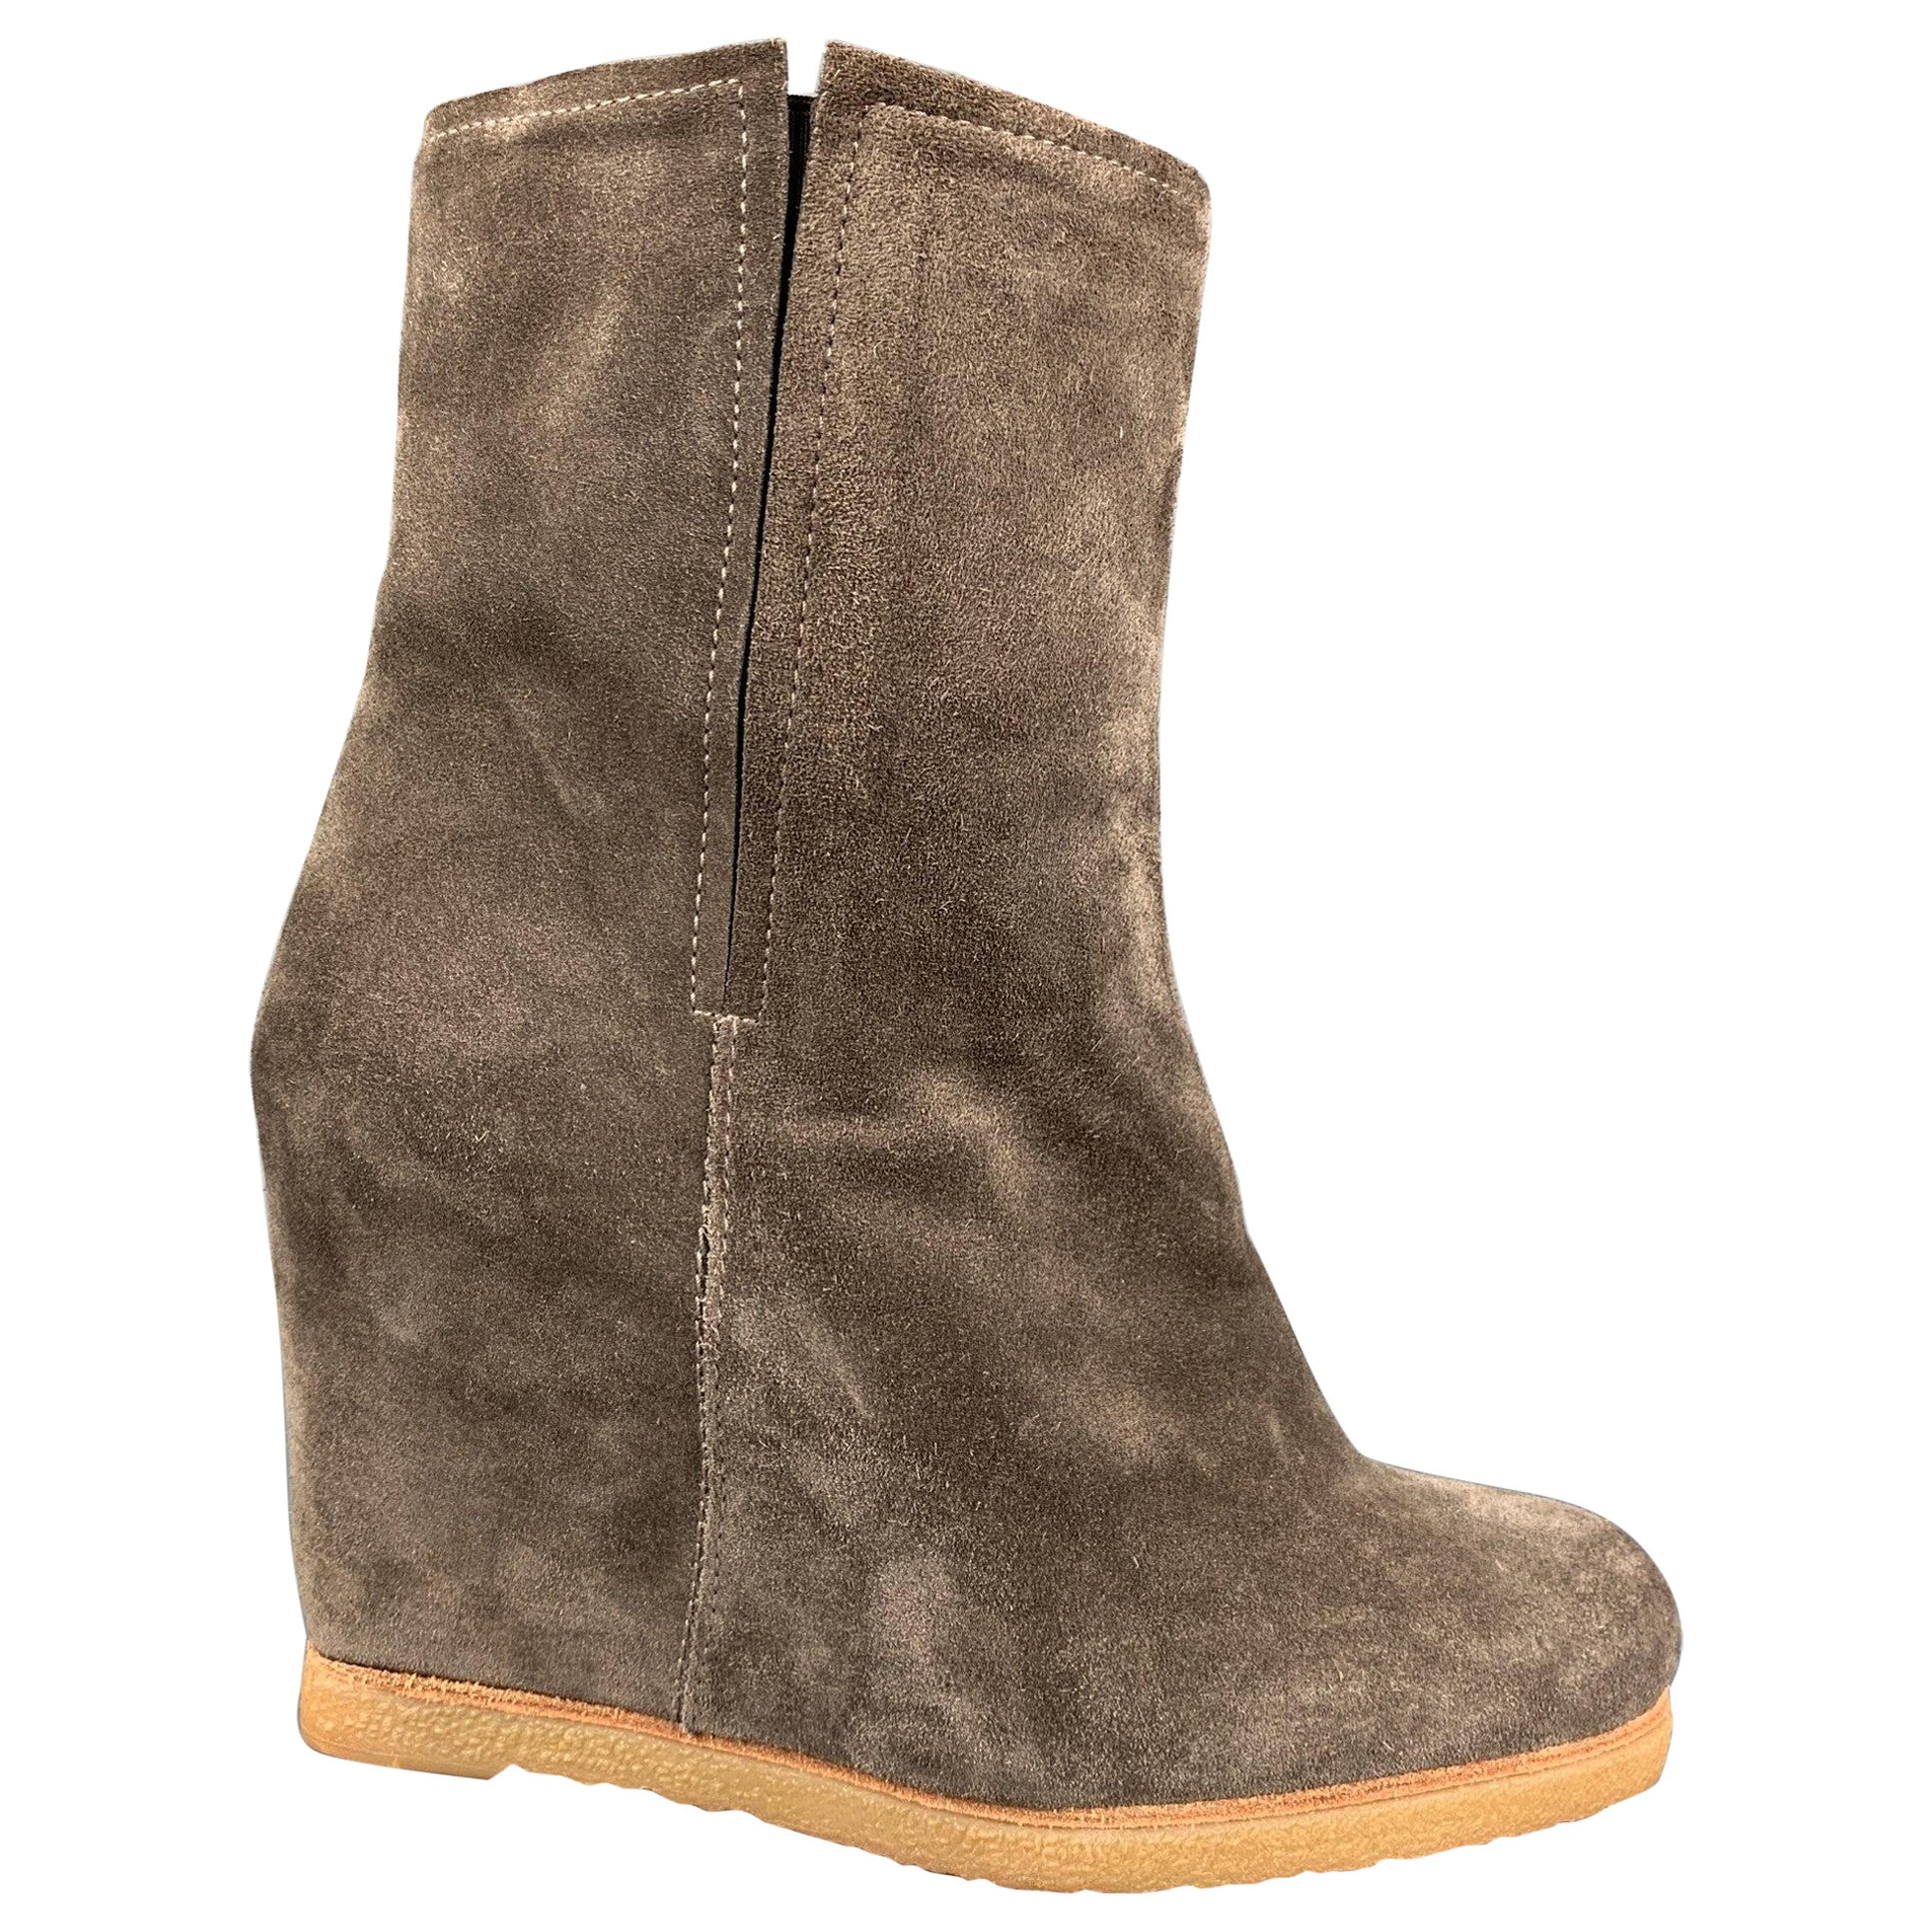 STUART WEITZMAN Size 9 Taupe Suede Wedge Boots For Sale